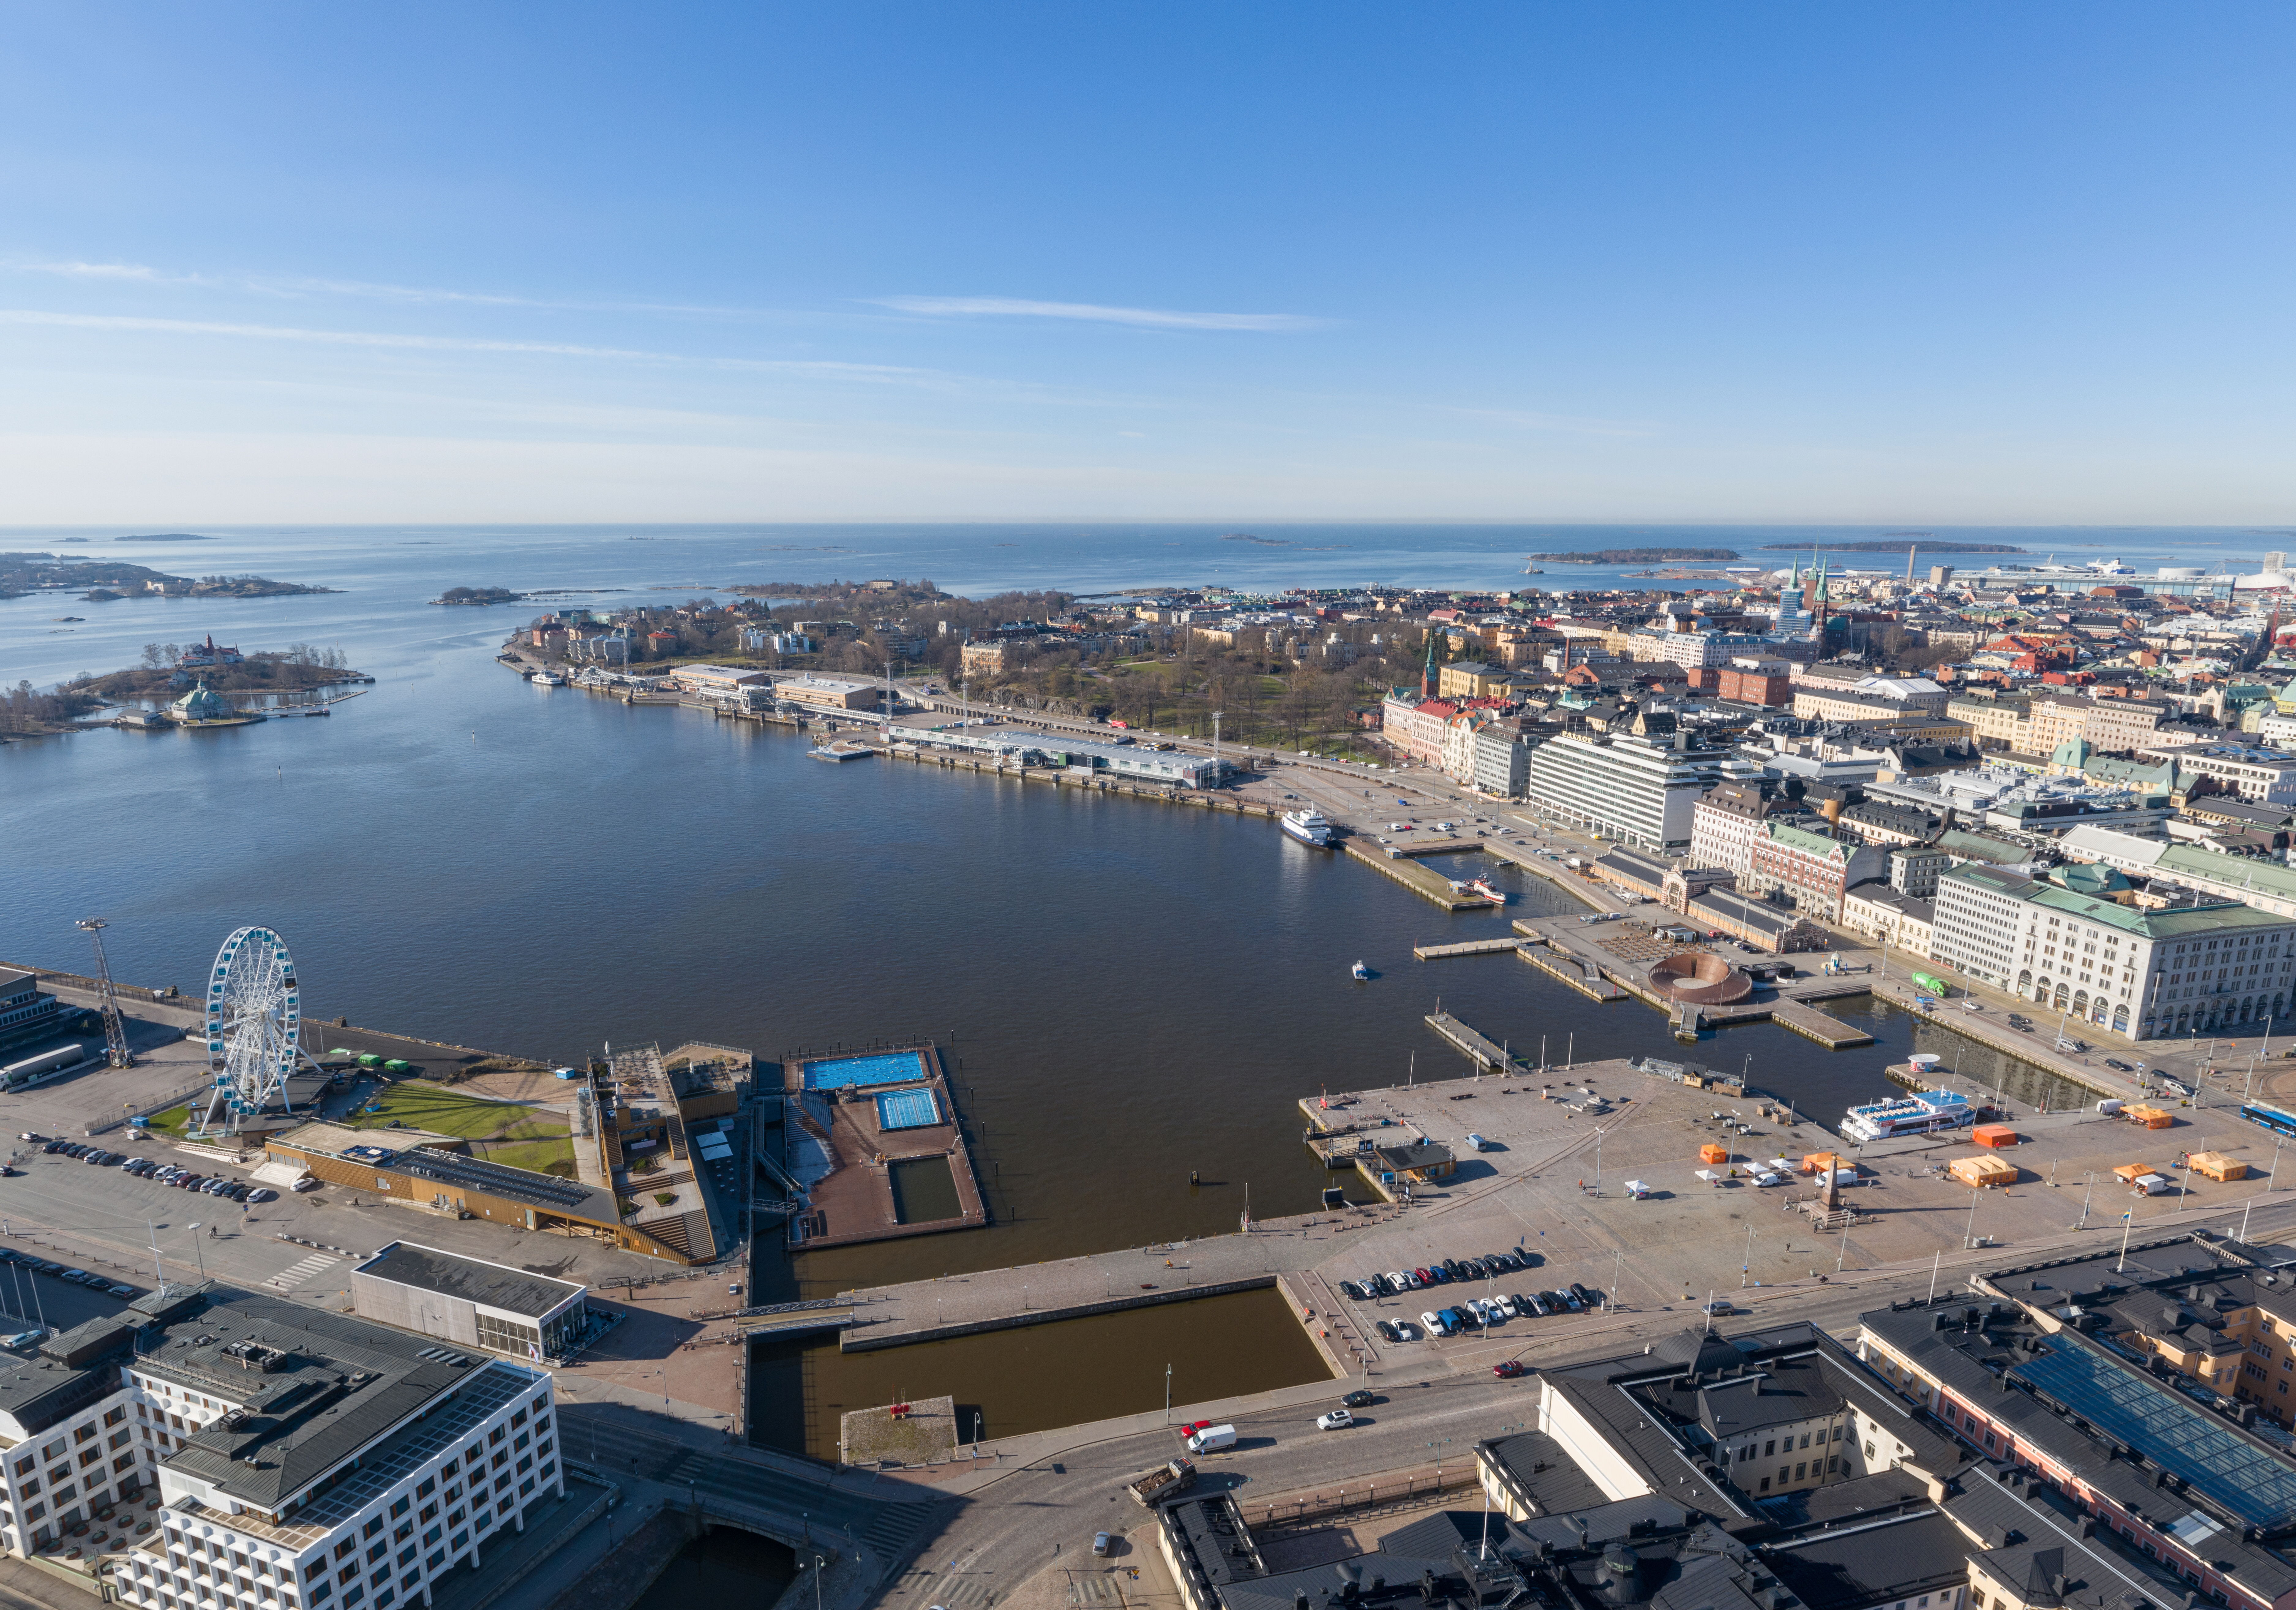 View of Makasiiniranta and Helsinki’s wider South Harbour area and archipelago